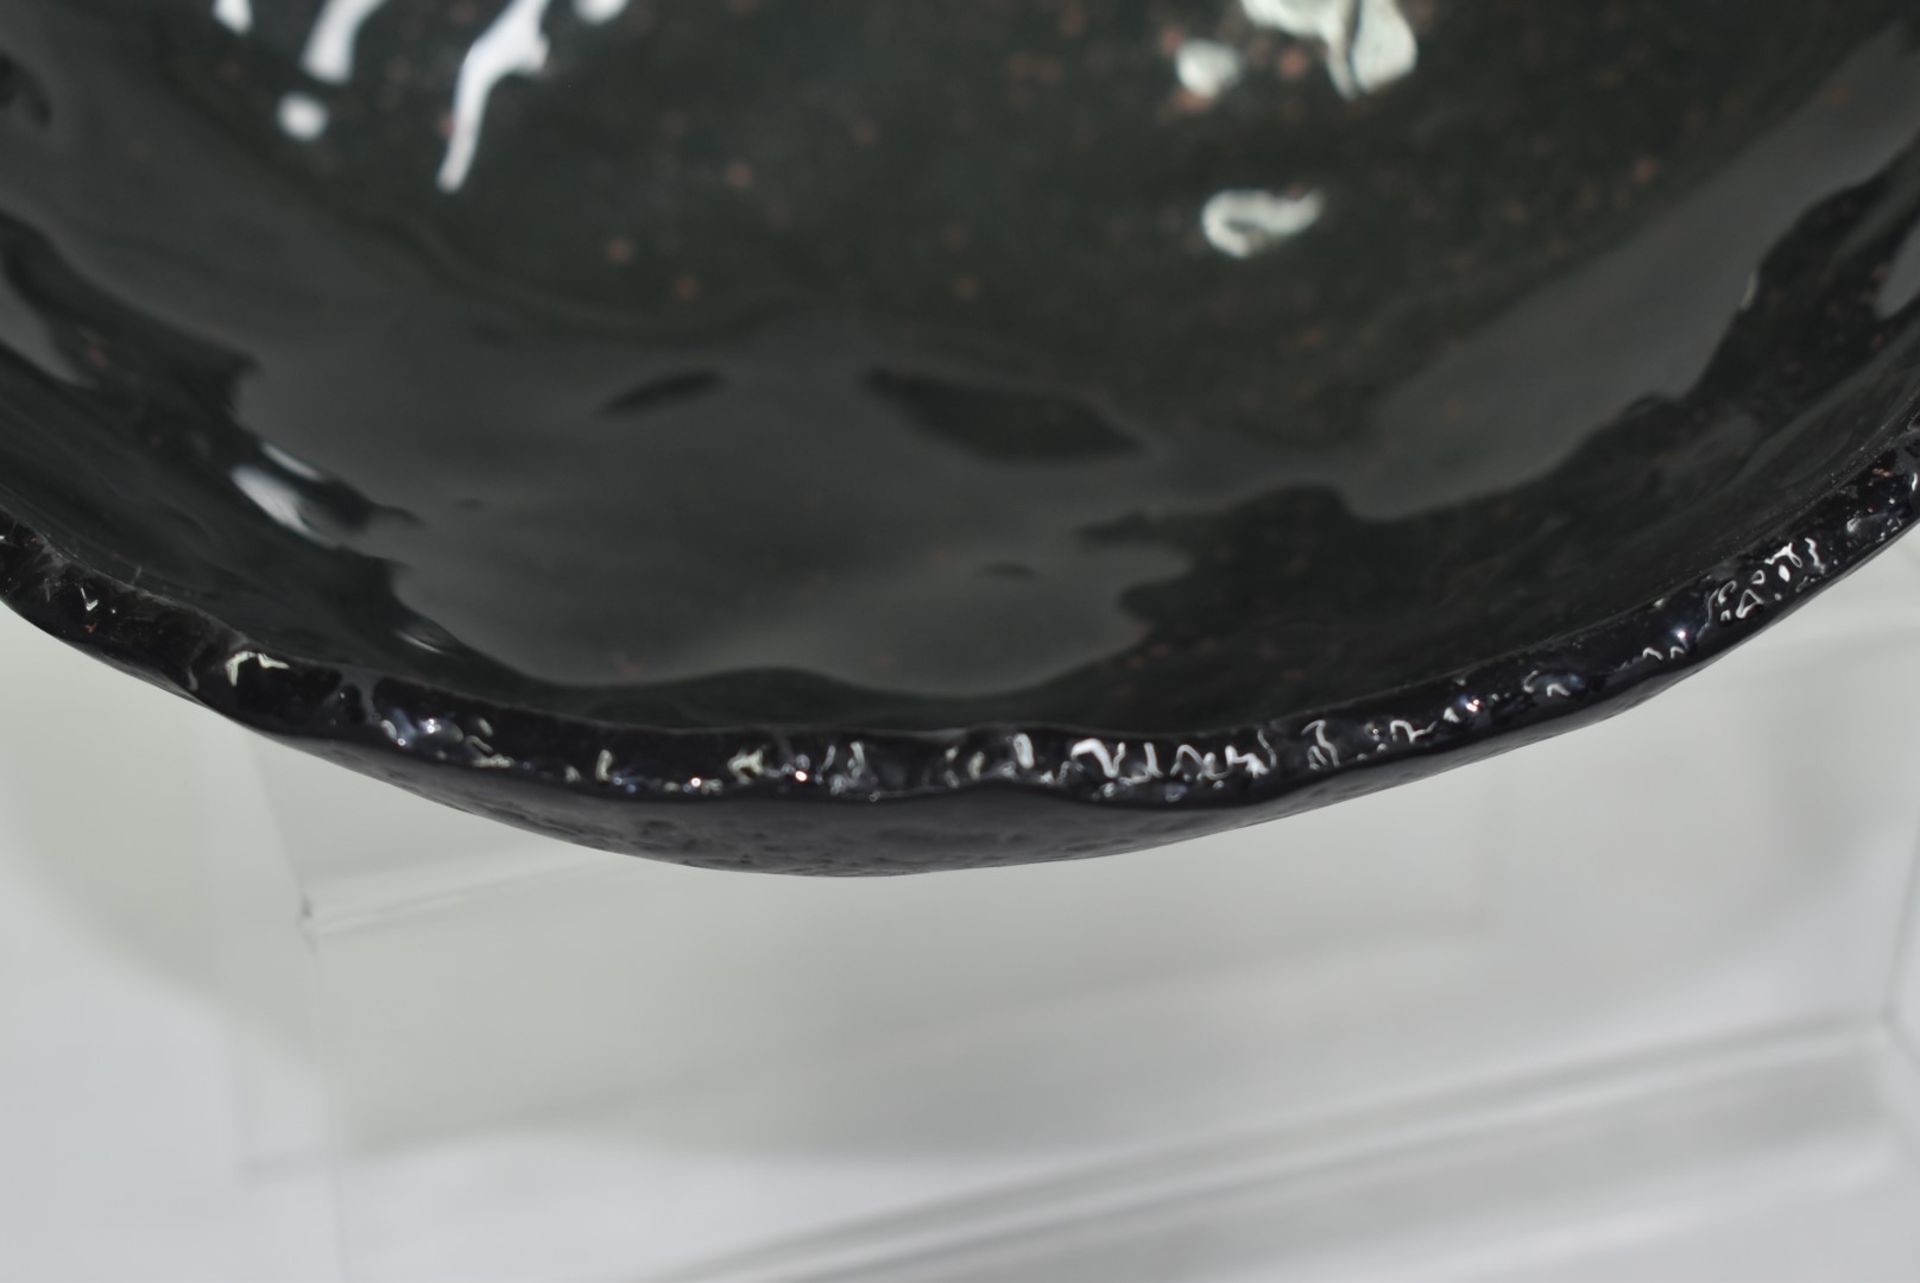 4 x Pordamsa Craft Glass Cosmos Dinner Bowls - Handcrafted Unique Dinnerware - Inspired by the Magic - Image 11 of 11